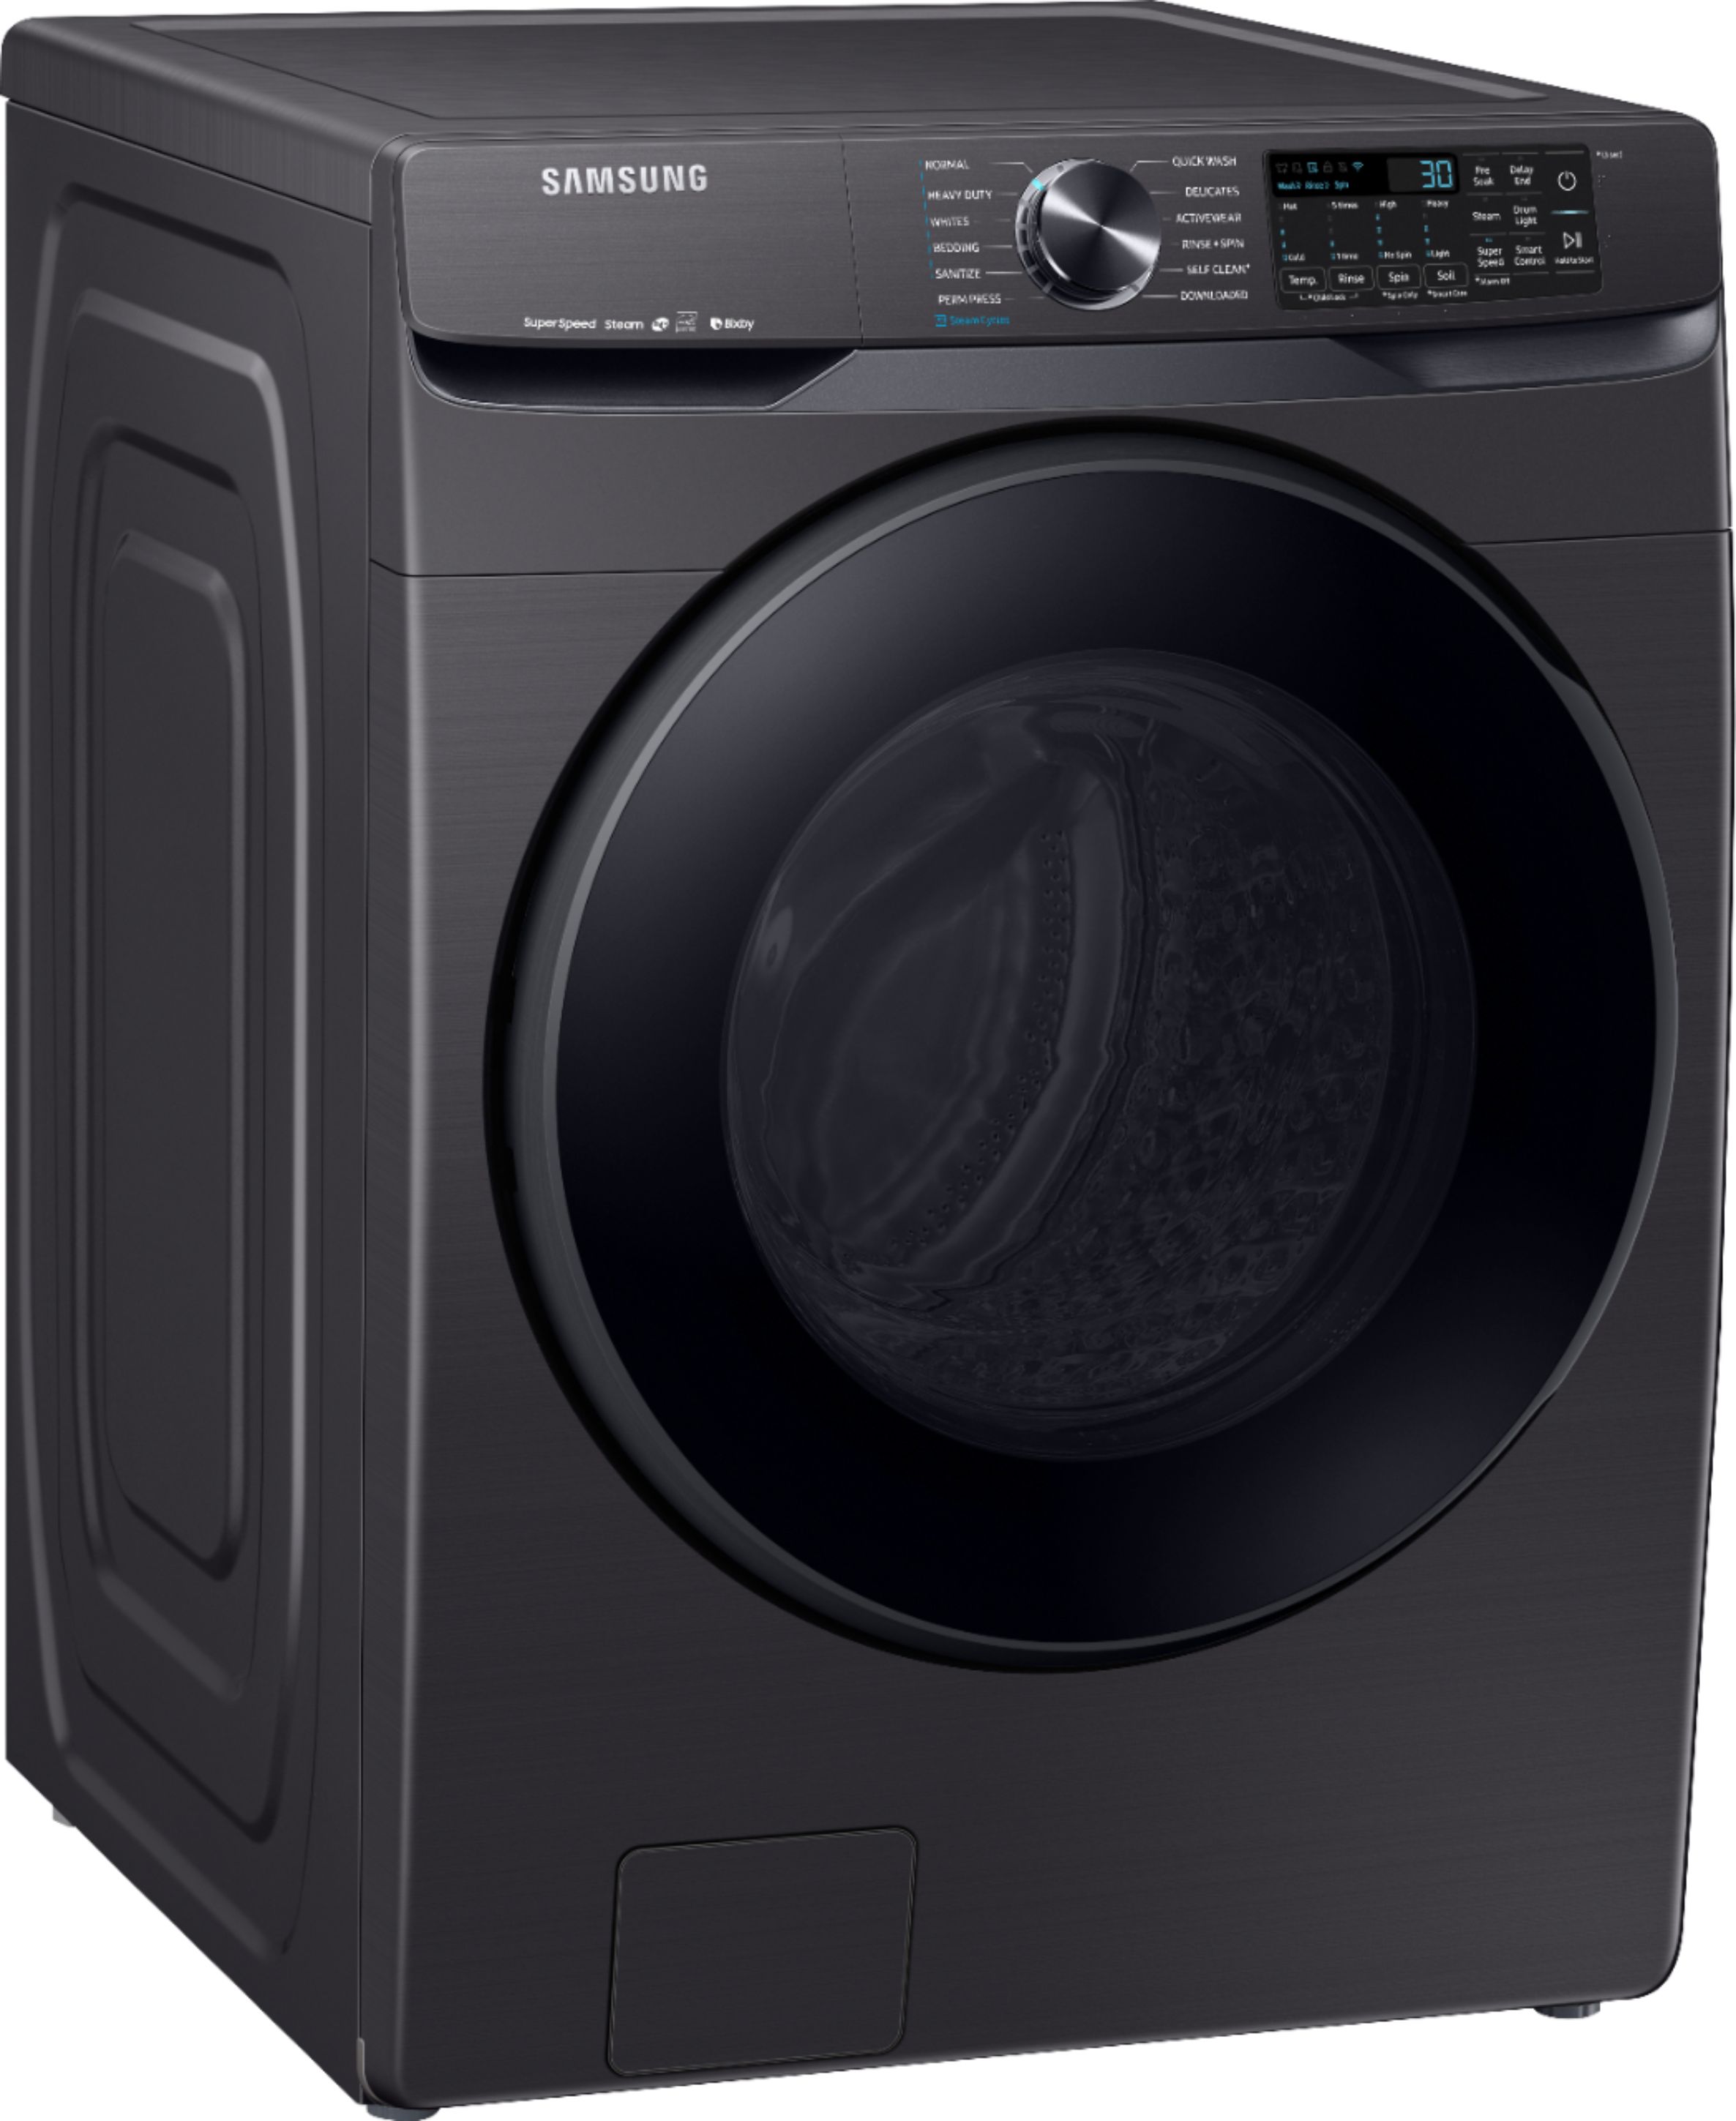 Angle View: LG - 2.4 Cu. Ft. Compact Smart Front Load Washer with Built-In Intelligence - Graphite steel